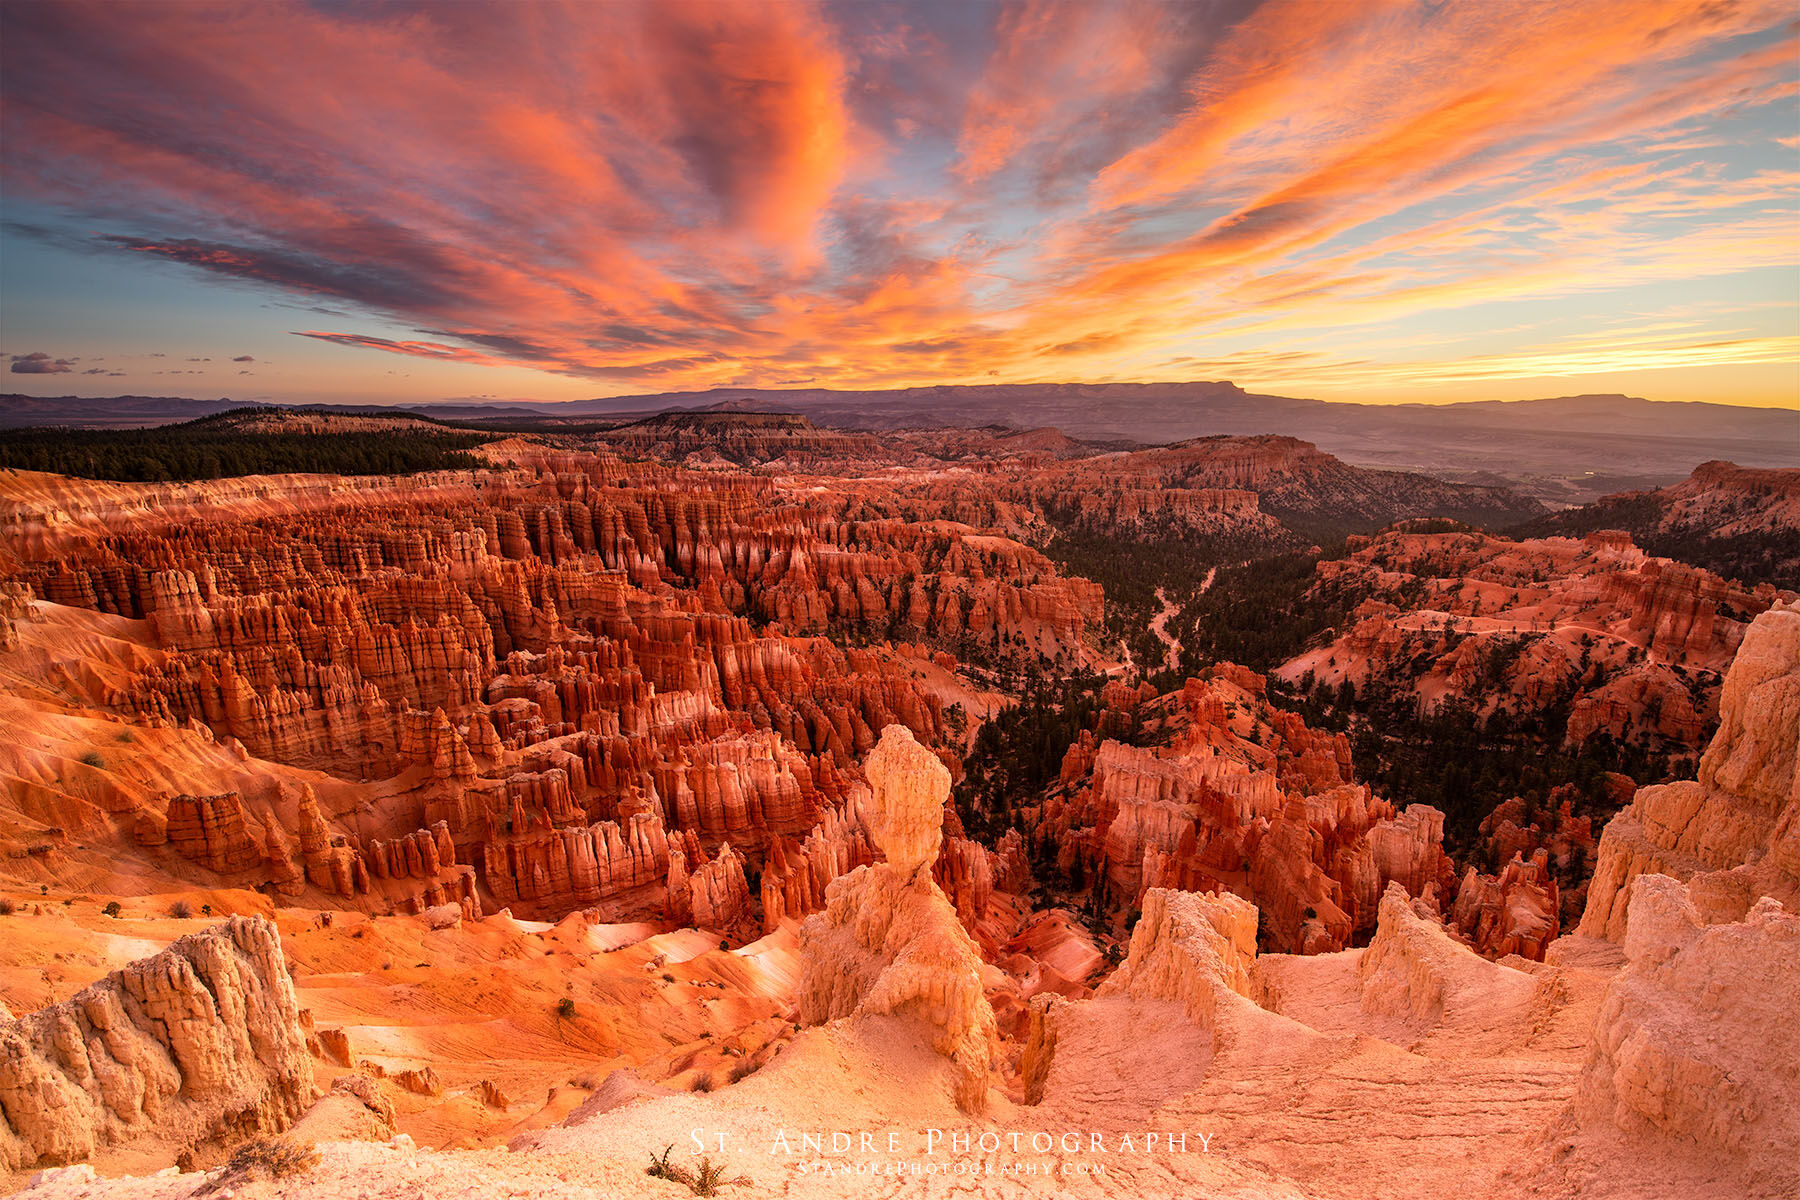 Orange and red clouds lite up the sky above byrce canyon with hoodoos lit up with pre-dawn light. One large hoodoo stands out in the middle. 